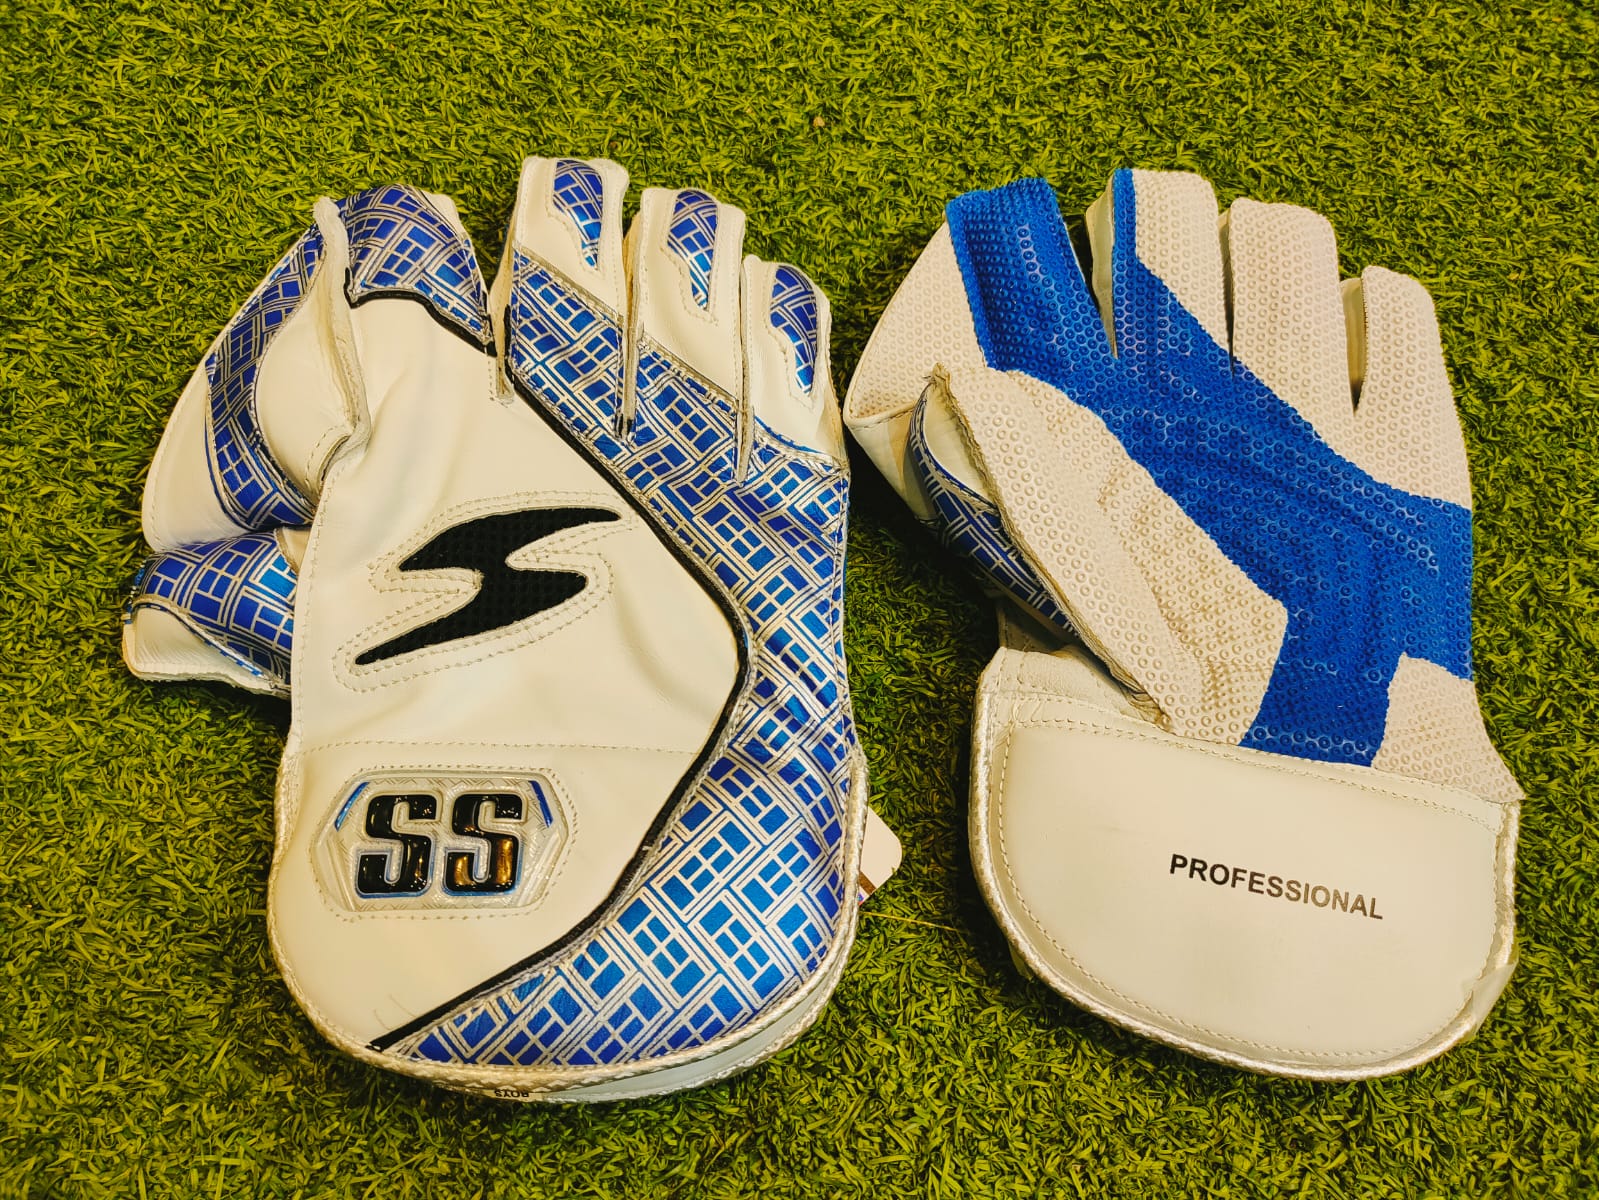 Cricket WK Gloves - SS - PROFESSIONAL